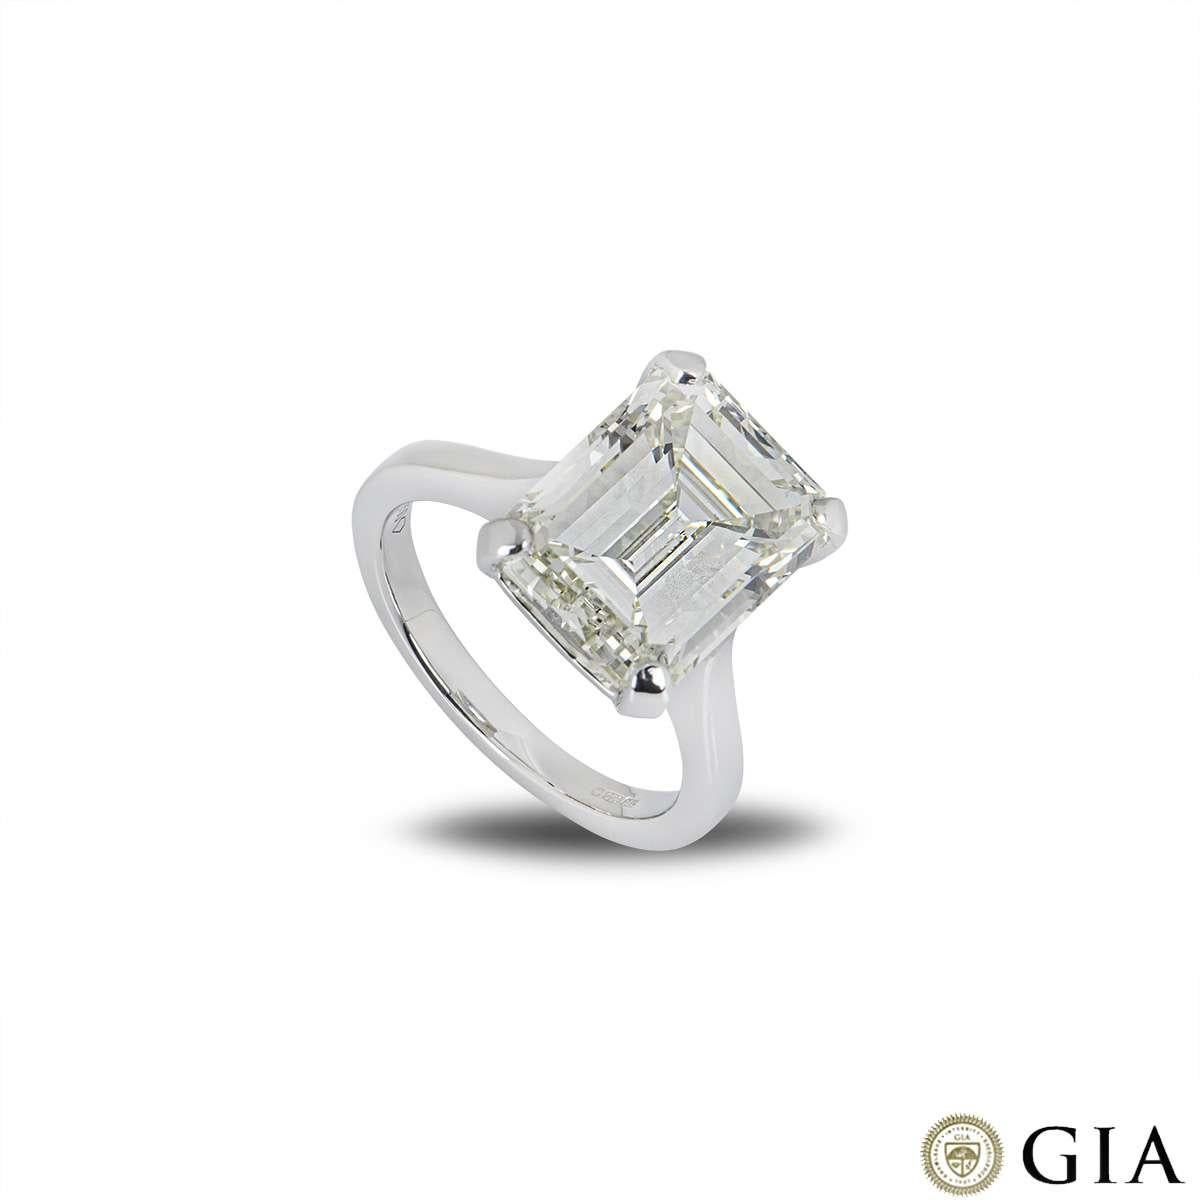 A spectacular emerald cut diamond ring in platinum. The diamond is set within a classic 4 claw setting and weighs 8.02ct, O-P colour range and VS2 clarity. The ring is currently a size UK M½ - EU 53 - US 6.5 but can be adjusted for a perfect fit and